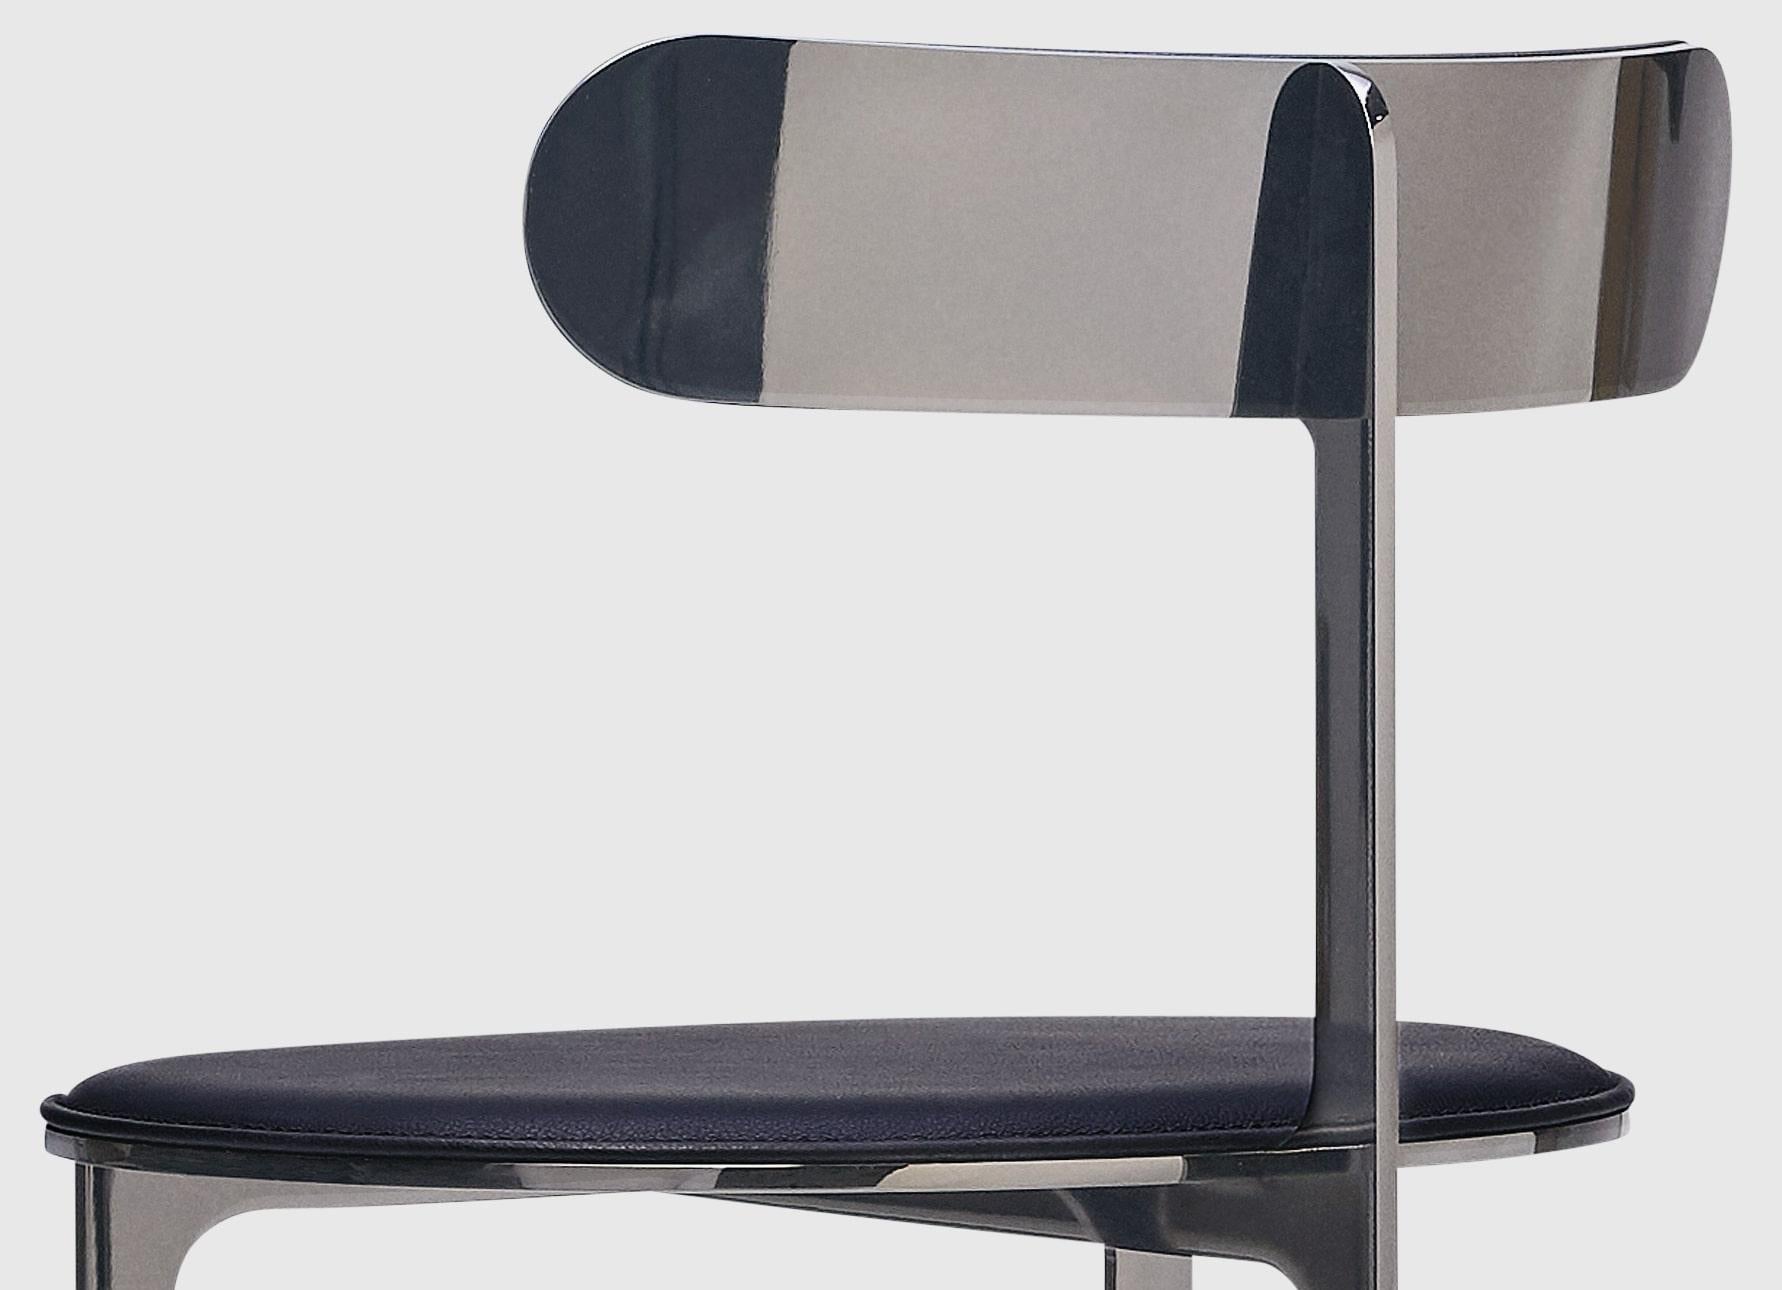 Park Place Dining Chair by Yabu Pushelberg in Black Nickel and Nubuck Leather In New Condition For Sale In Toronto, ON